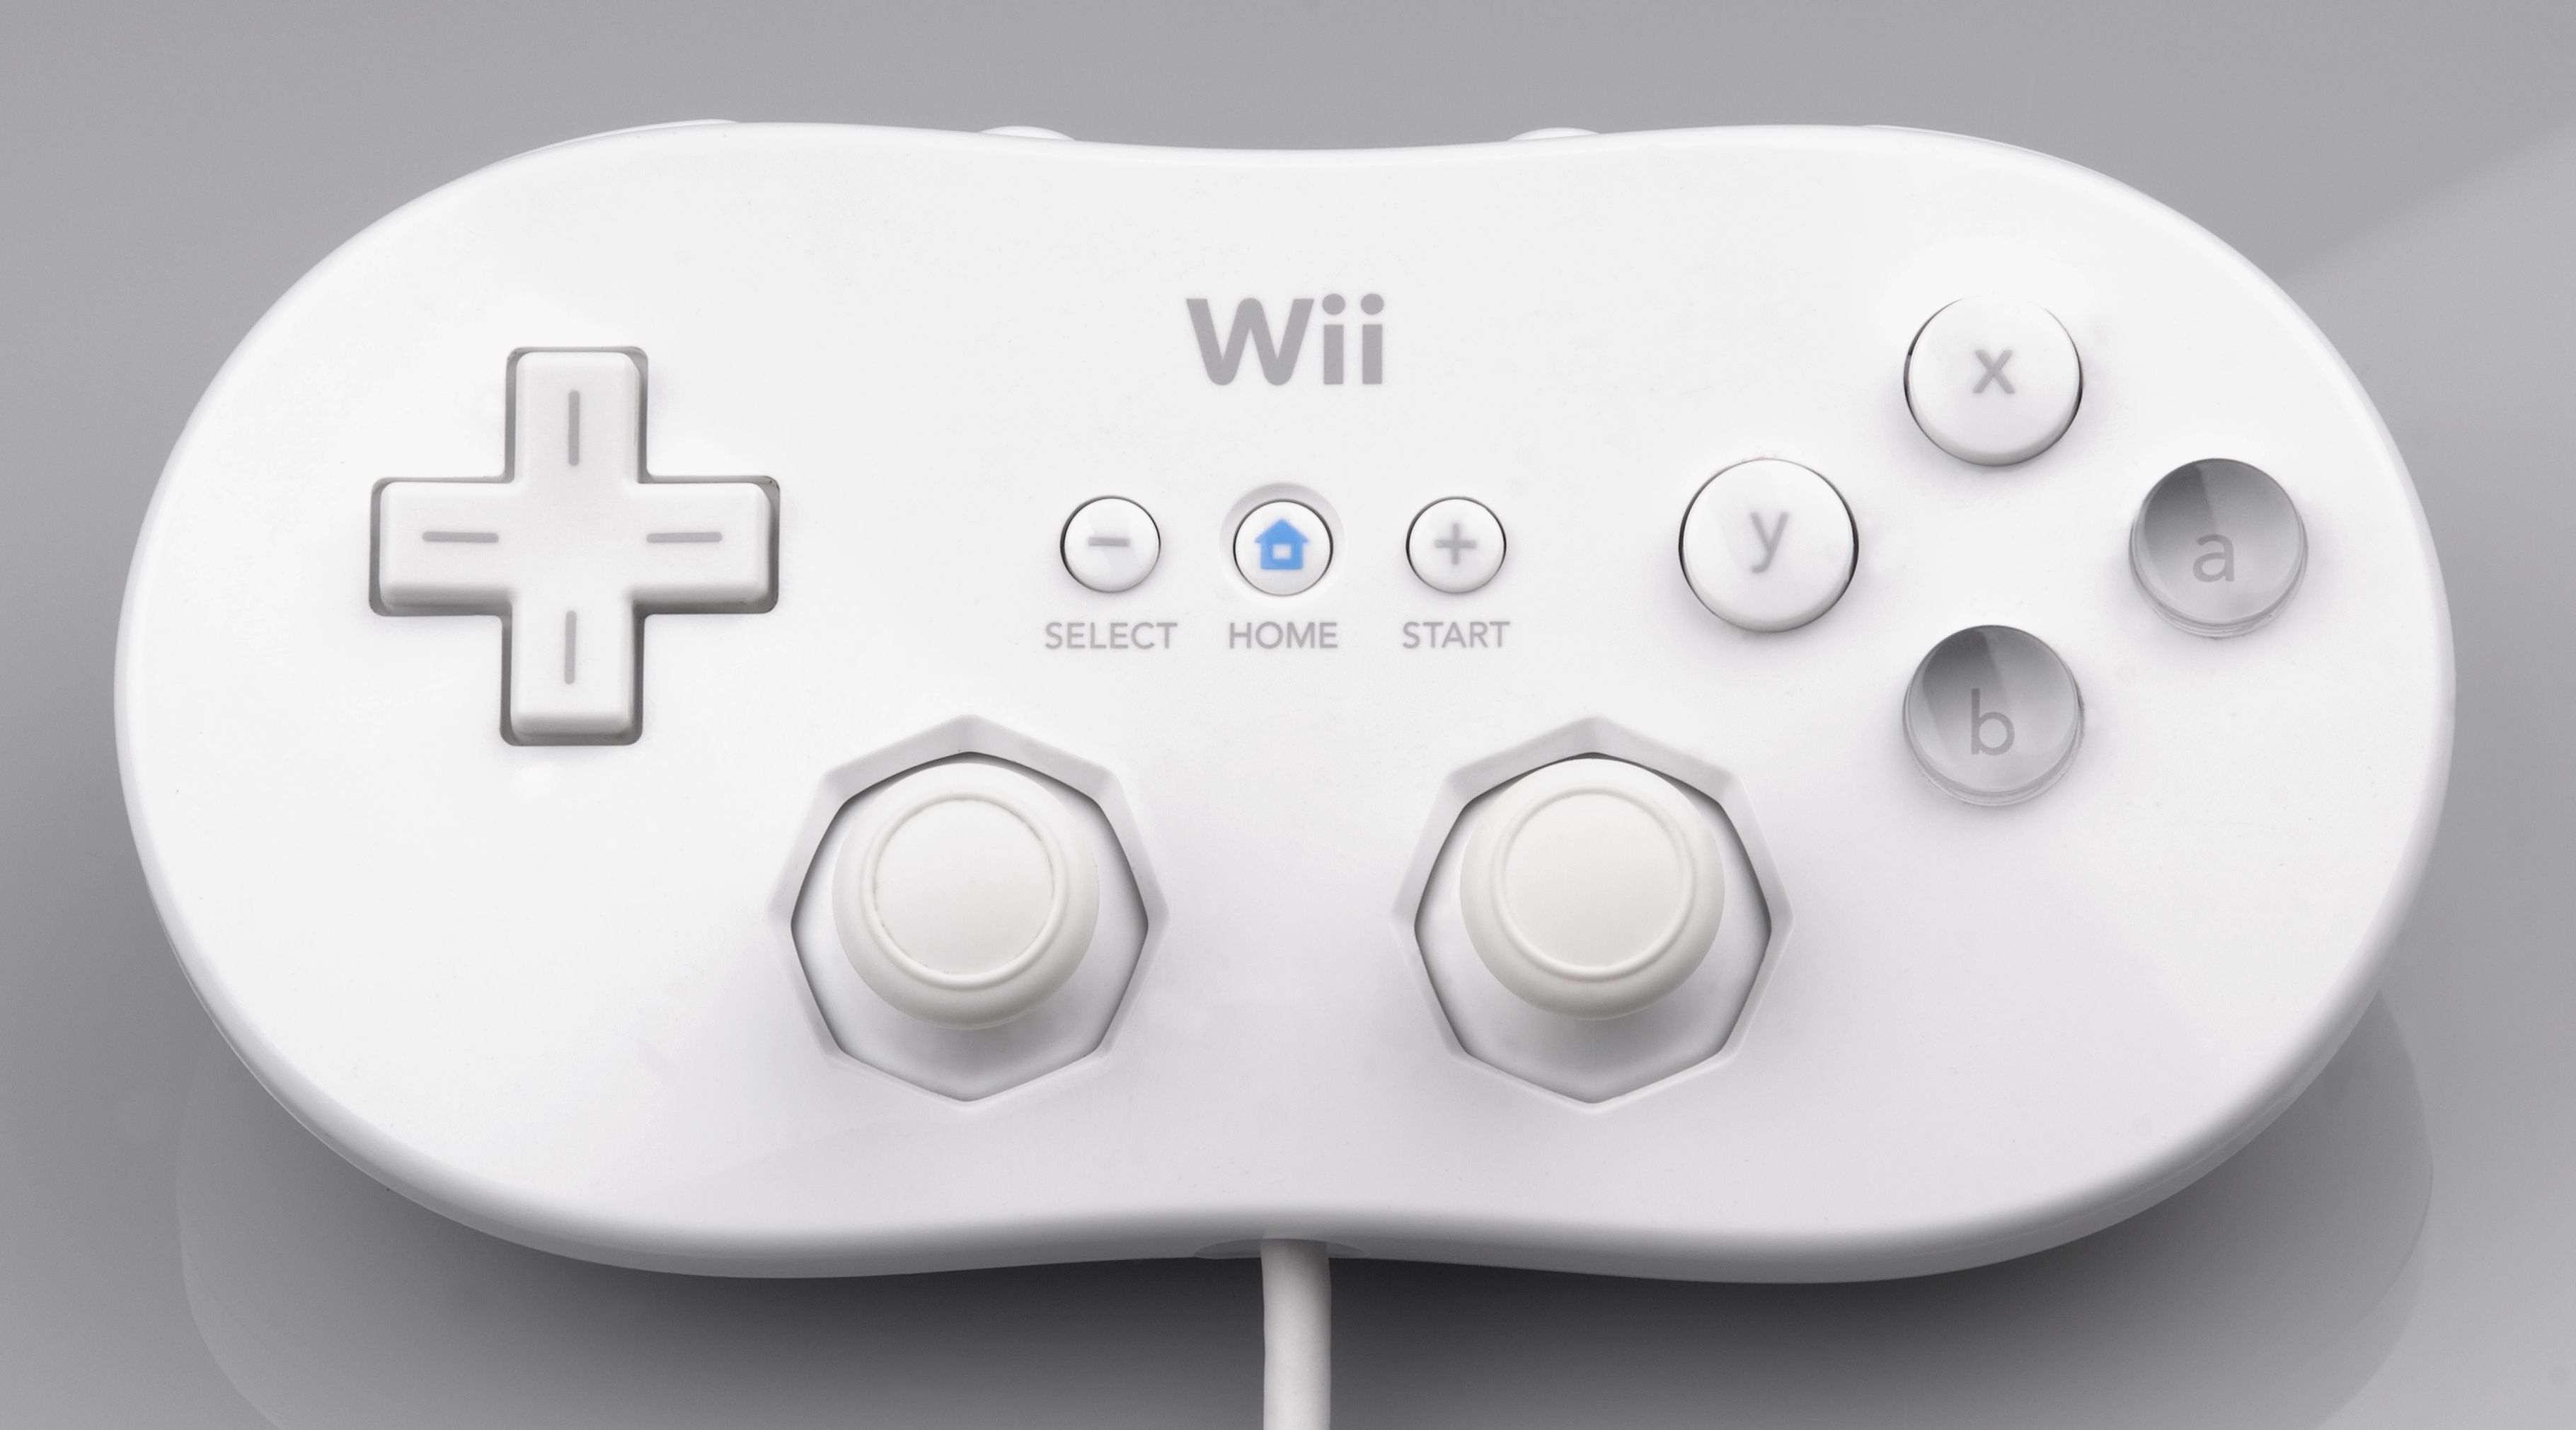 wii u compatible with wii